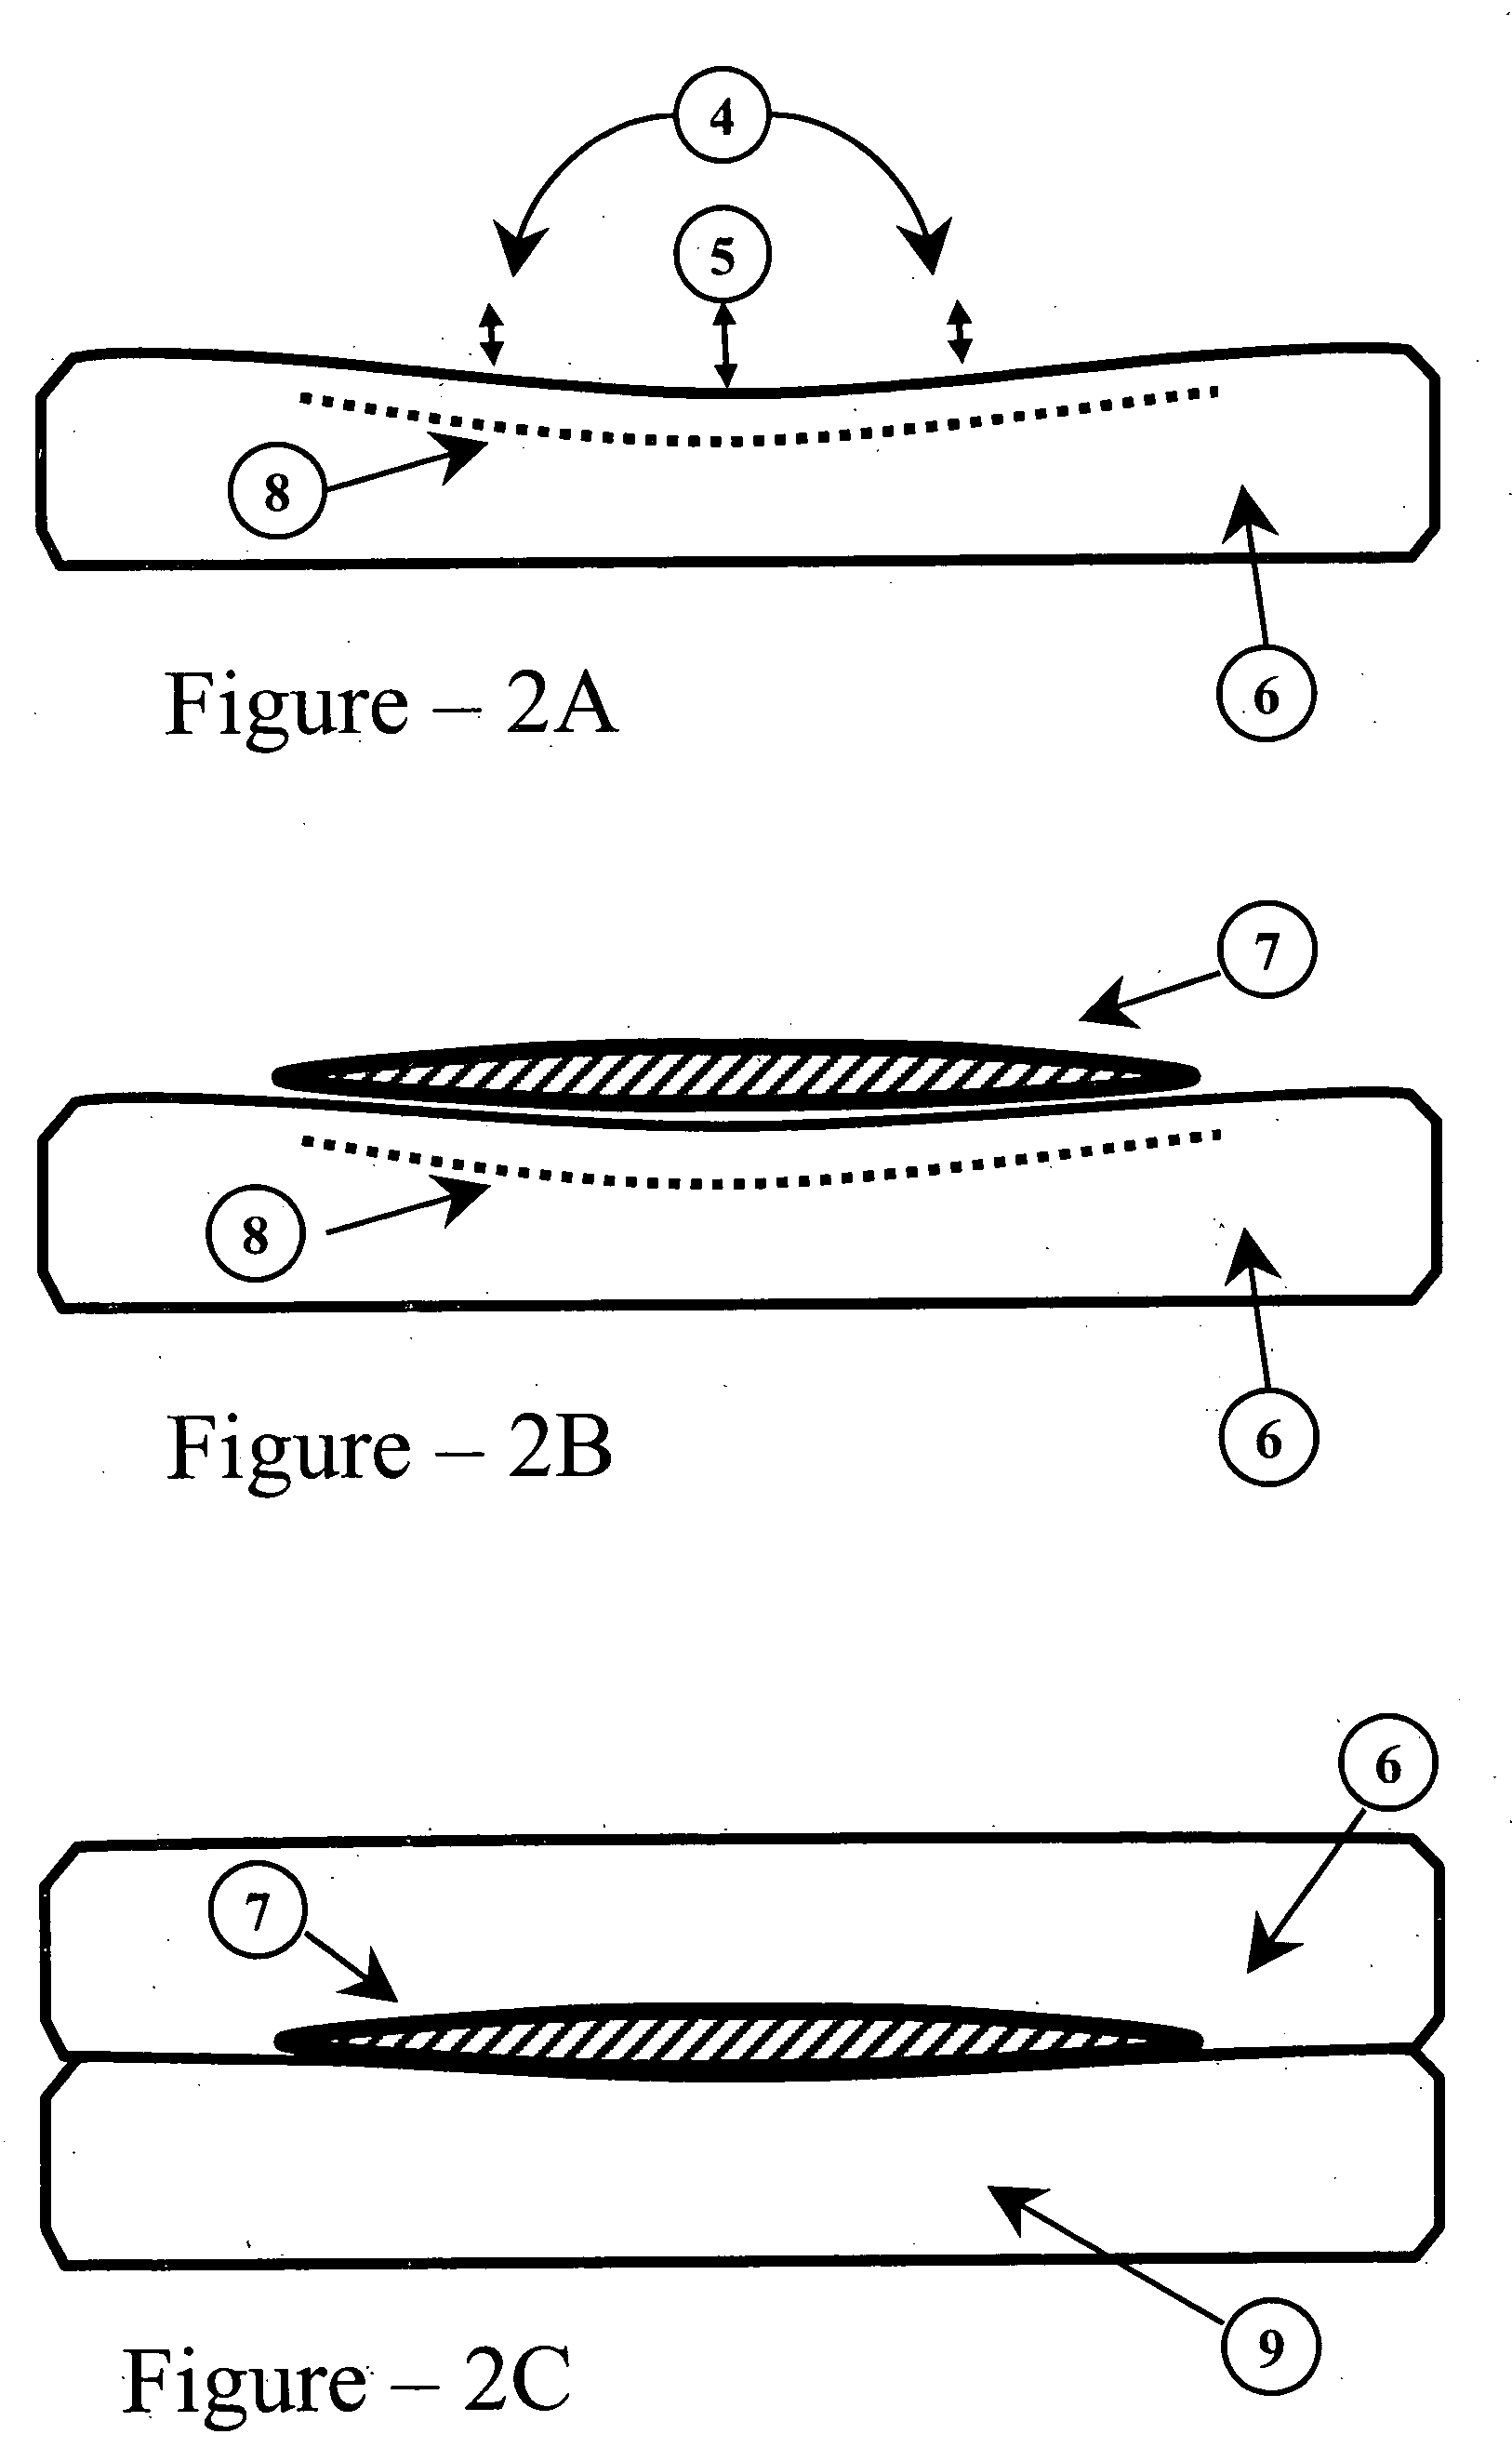 Inflatable device for adjusting the support and comfort of a mattress